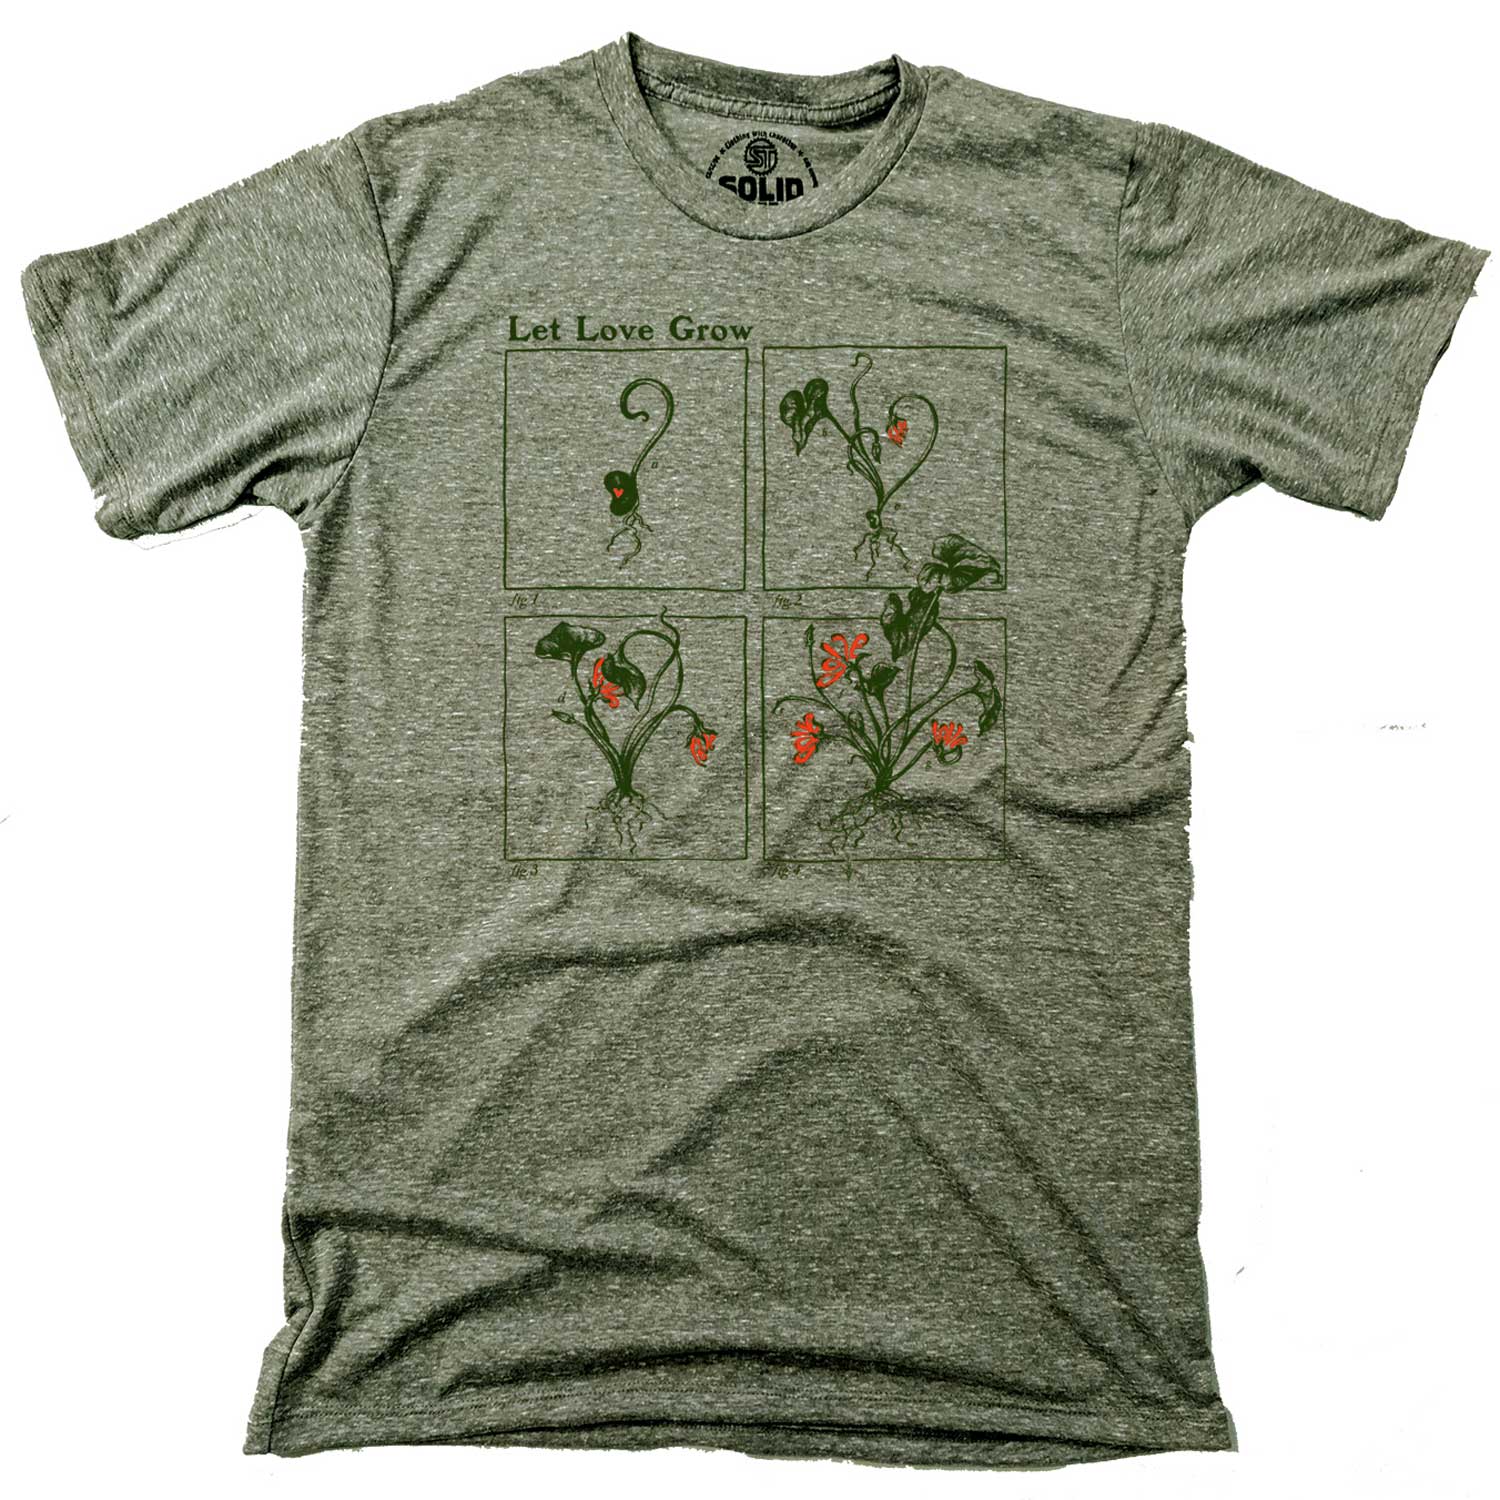 Men's Let Love Grow Cool Garden Graphic T-Shirt | Vintage Hopeless Romantic Tee | Solid Threads